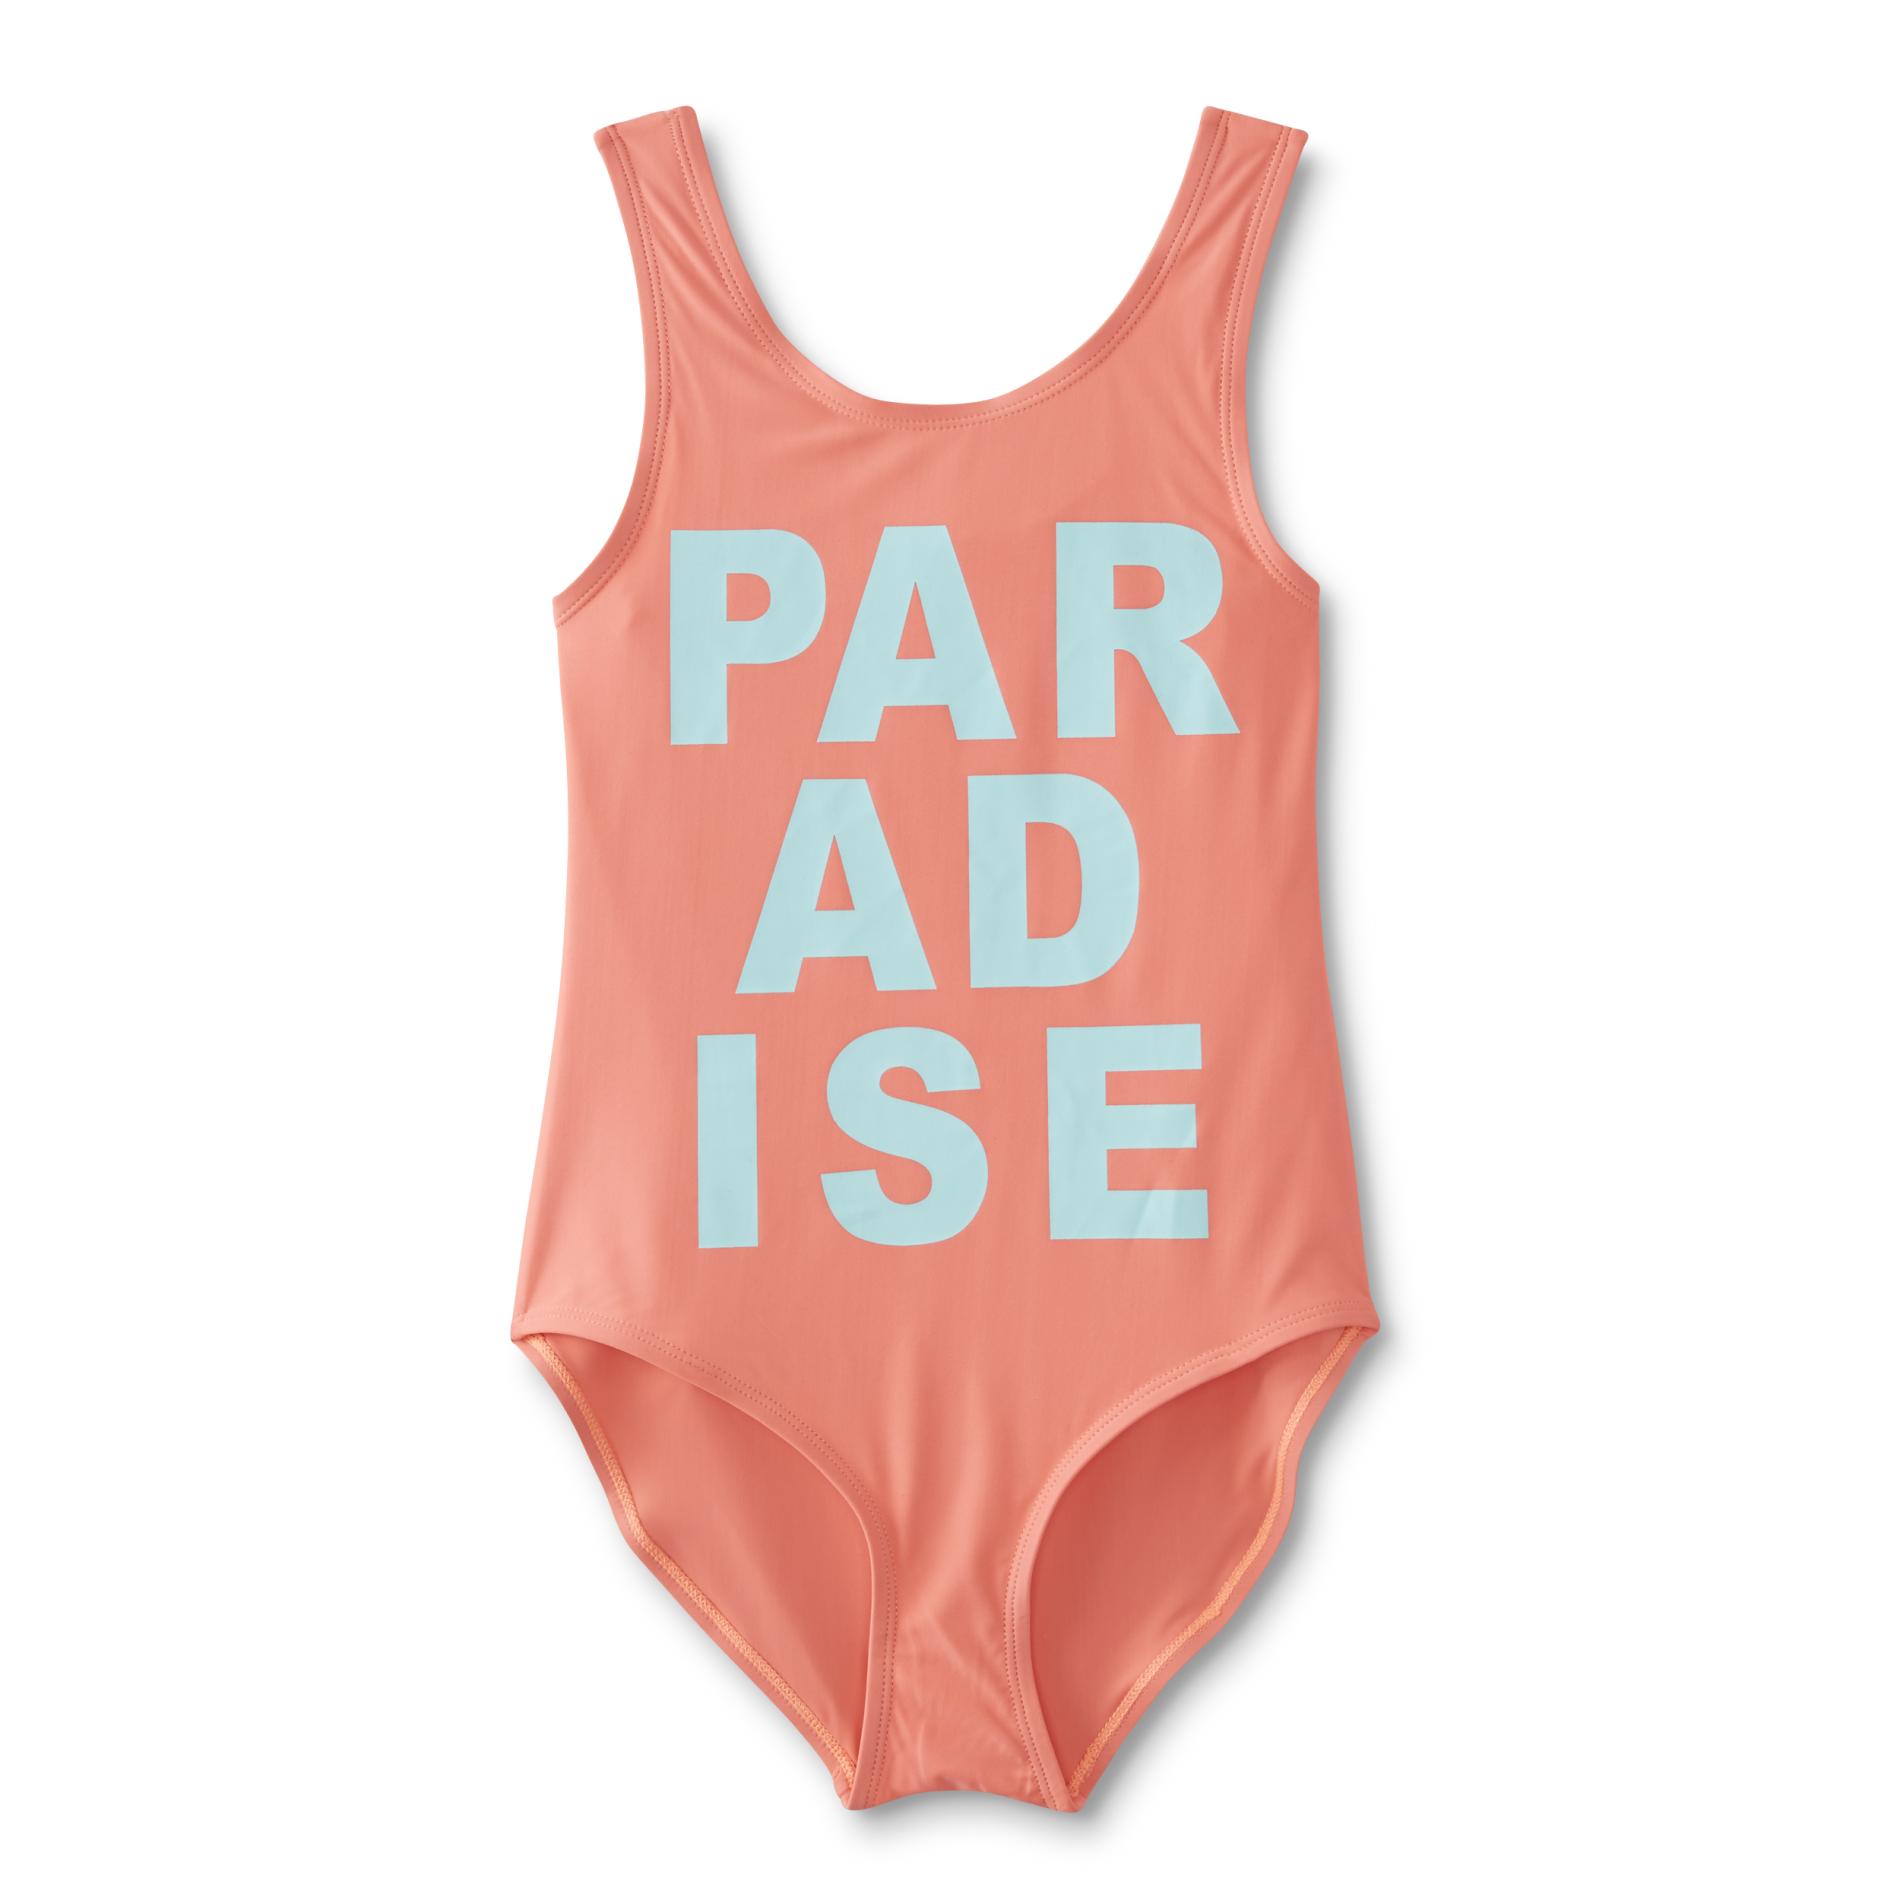 Simply Styled Girls' One-Piece Swimsuit - Paradise